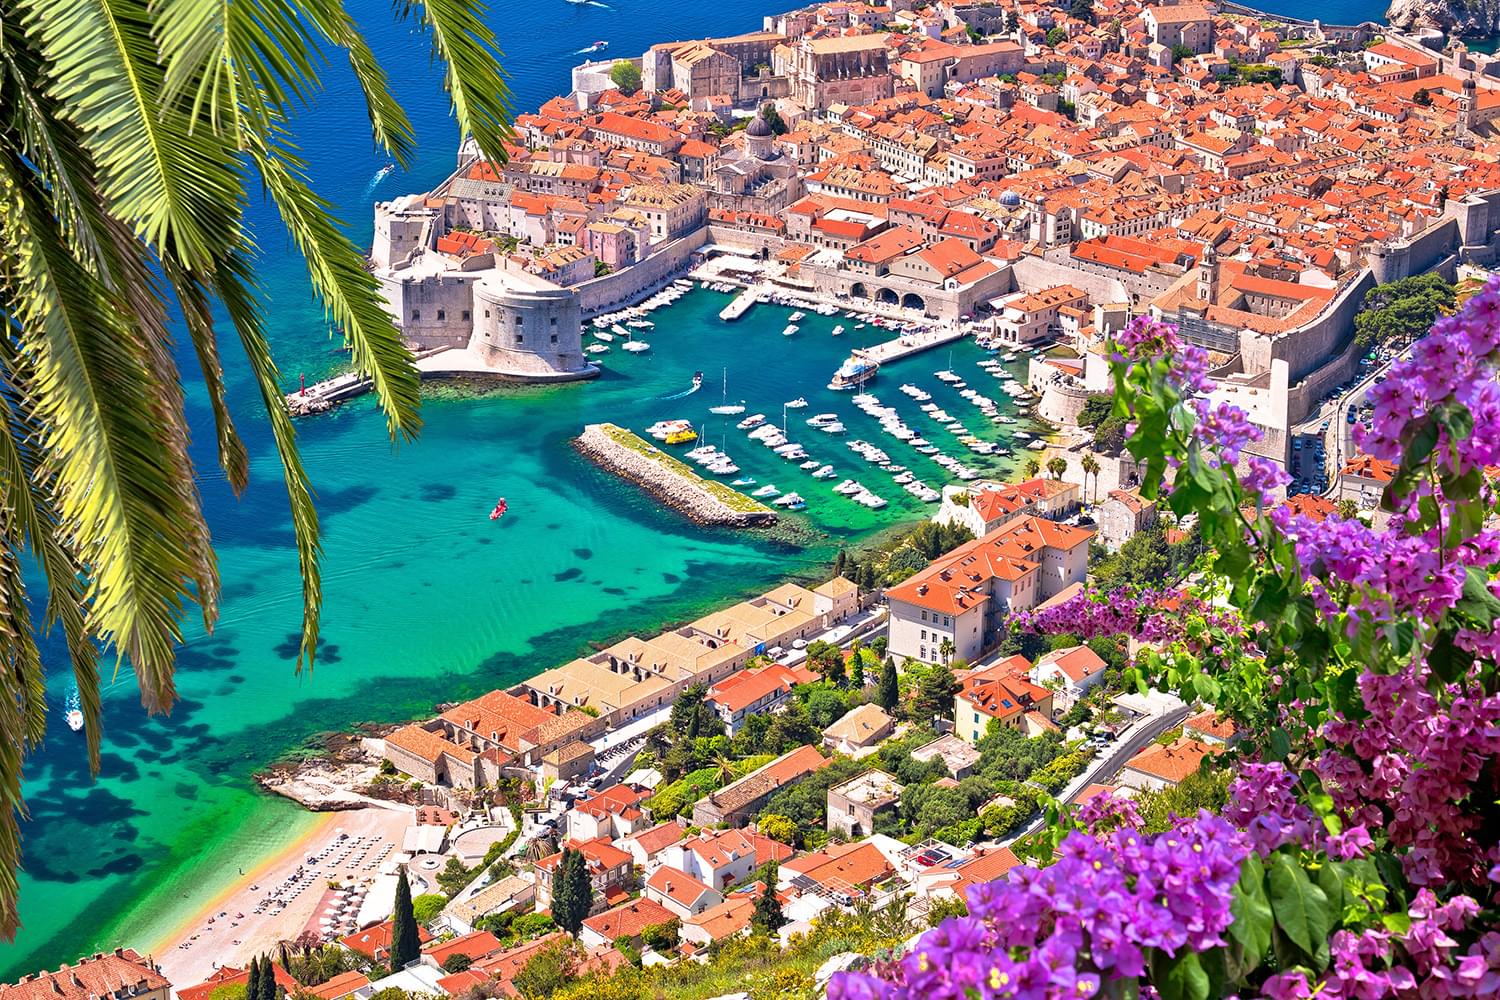 An overhead view of a beautiful town on the water. We see lots of homes and buildings with red roofs. The town is on the water and the water is a crystal clear blue and green. There are lots of boats on the water and we can see the coral at the bottom of the water. From the viewers vantage point you can see purple flowers and a palm trees leaves.